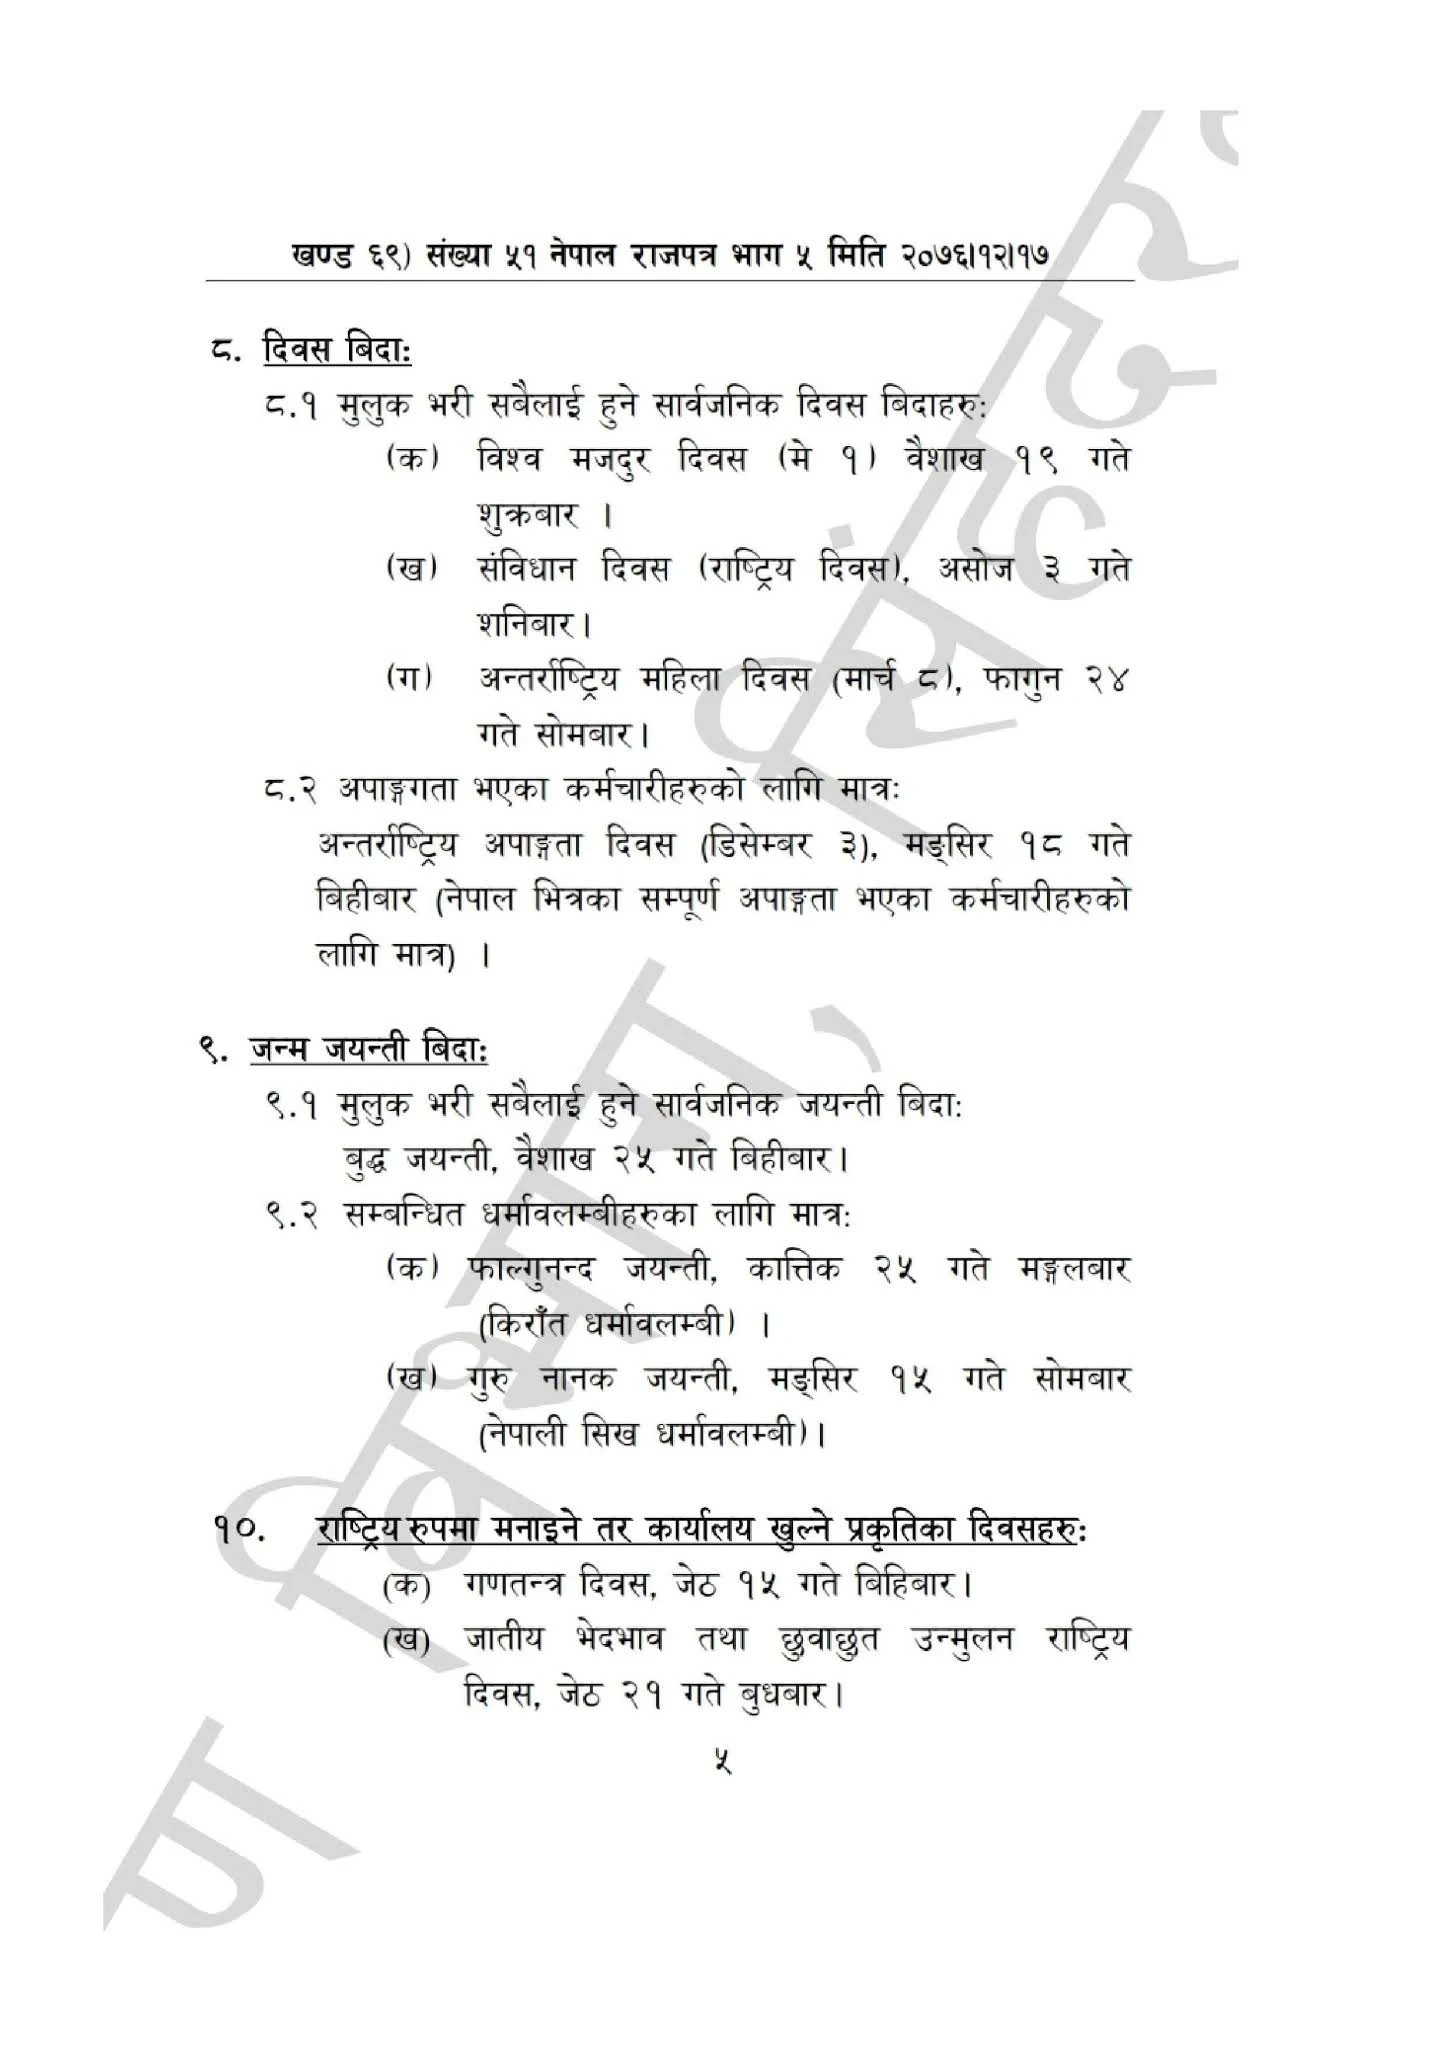 Public Holidays in Nepal for 2077 BS